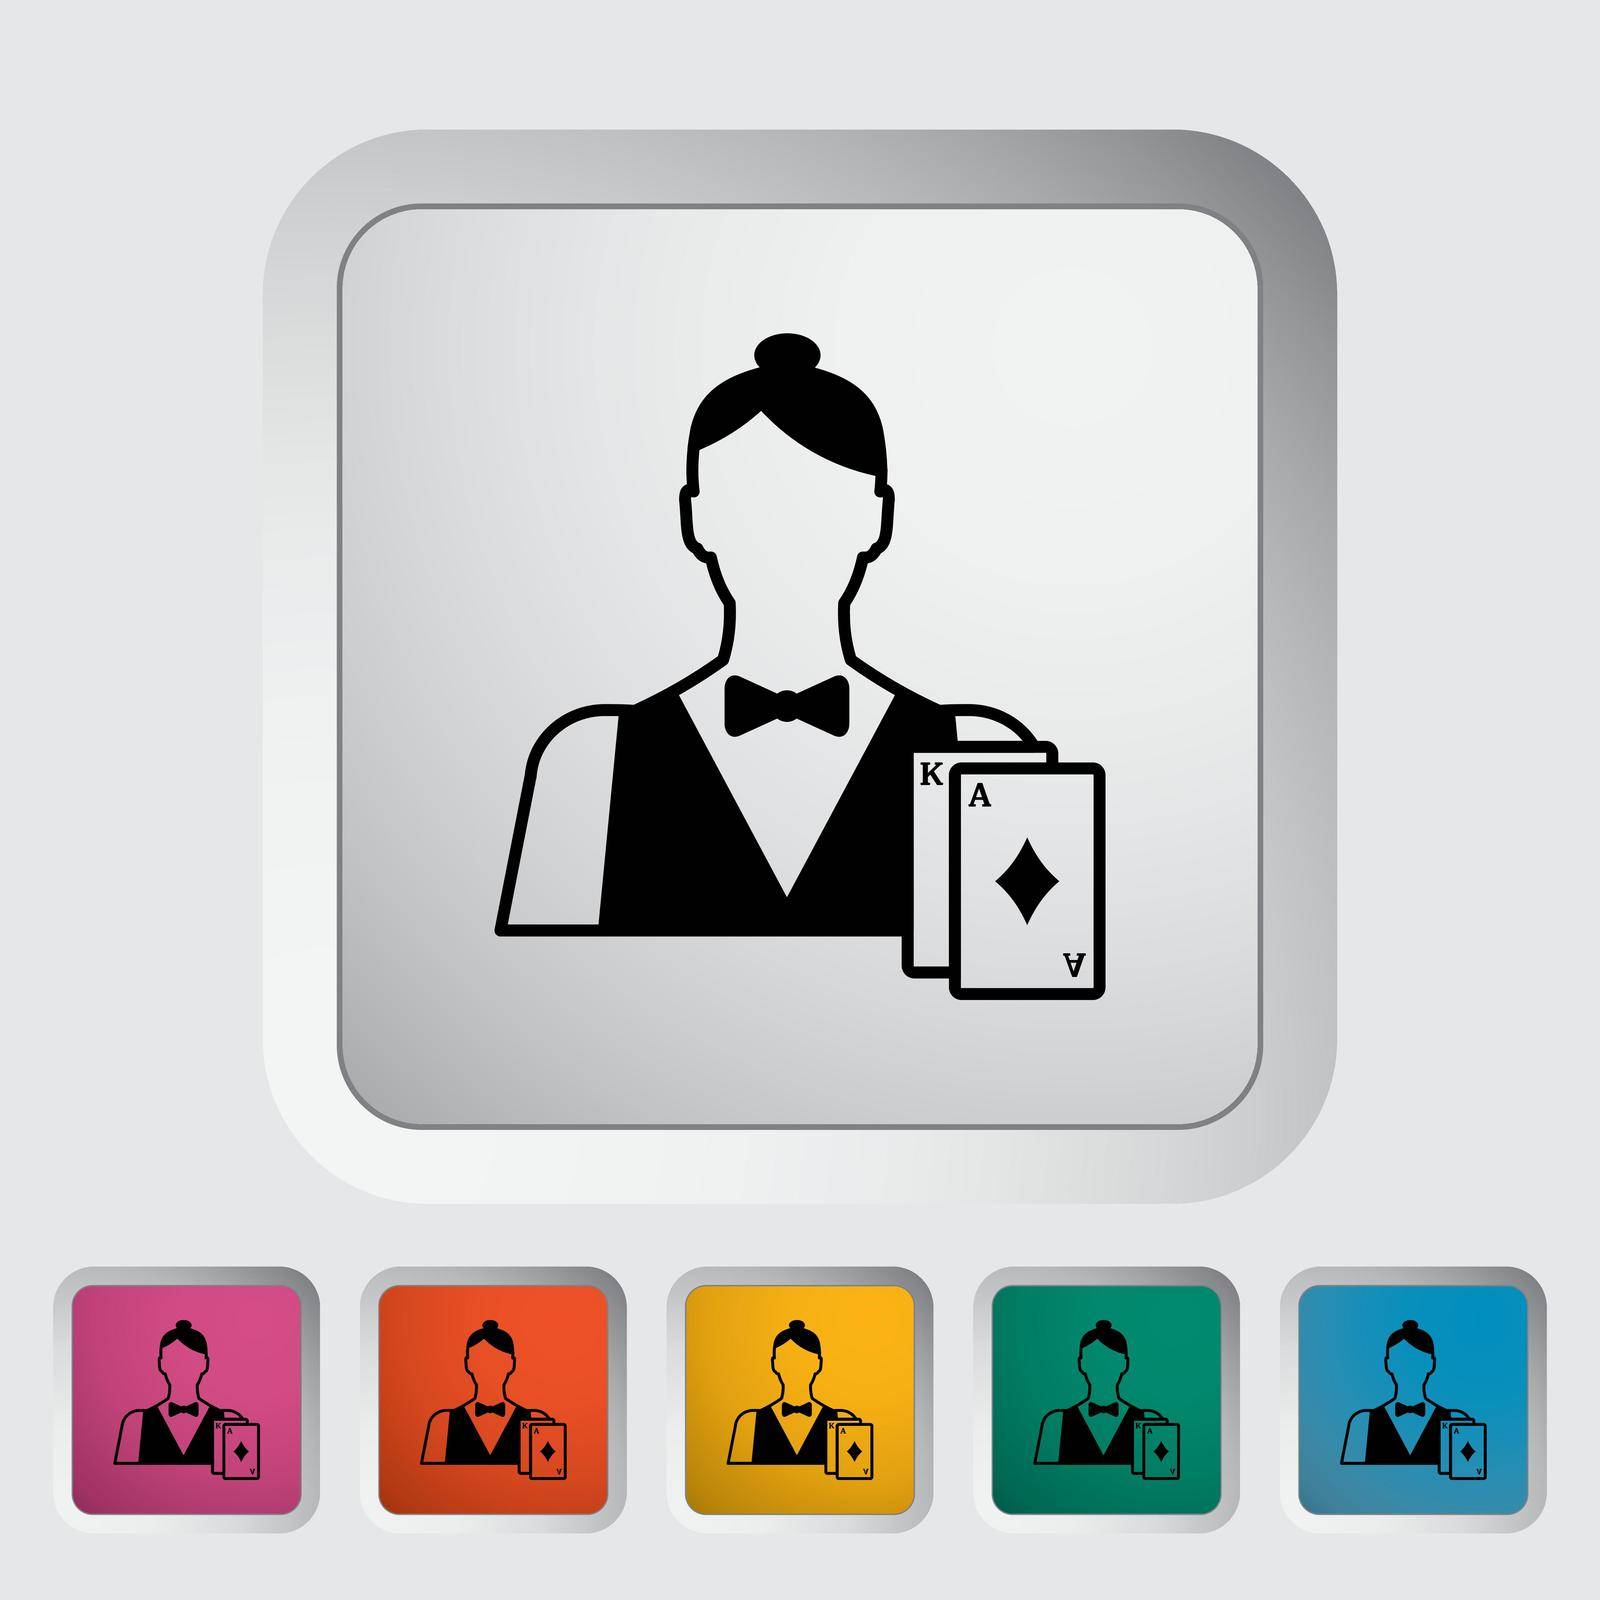 Live dealer. Single flat icon on the button. Vector illustration.